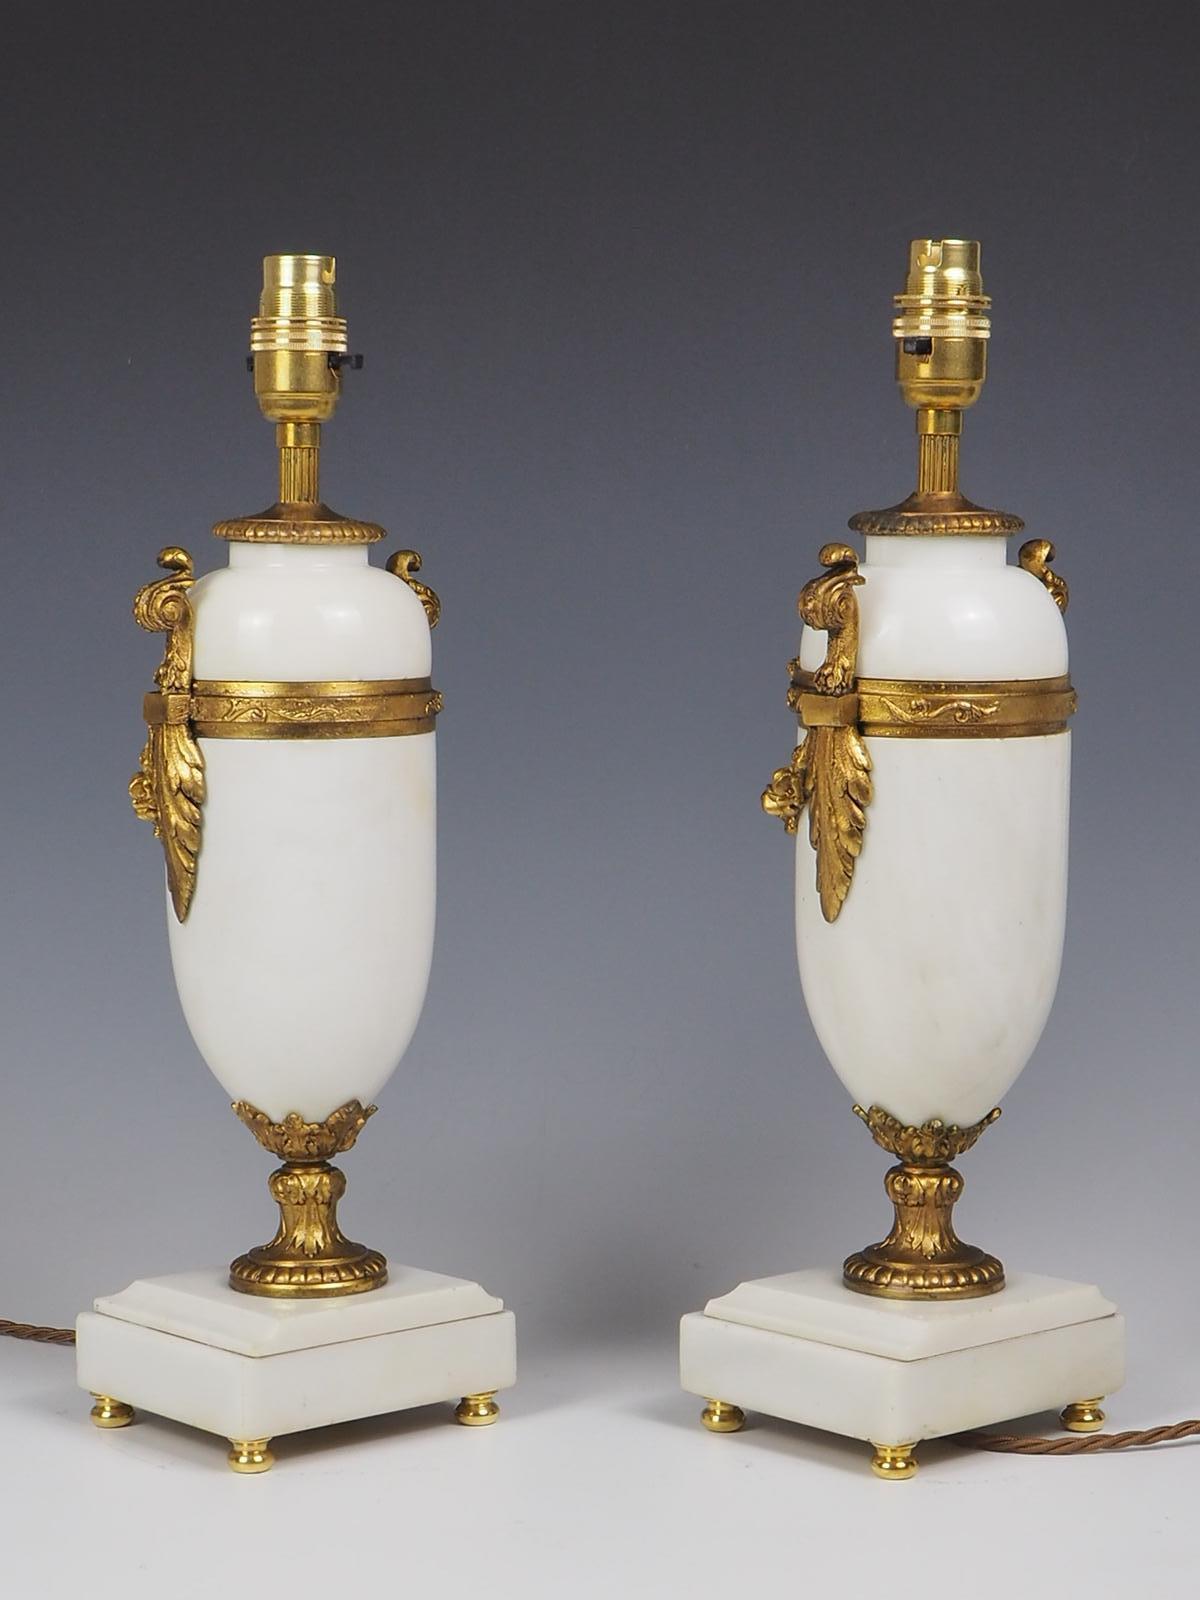 Pair of 19th Century French White Marble and Gilt Table Lamps For Sale 2